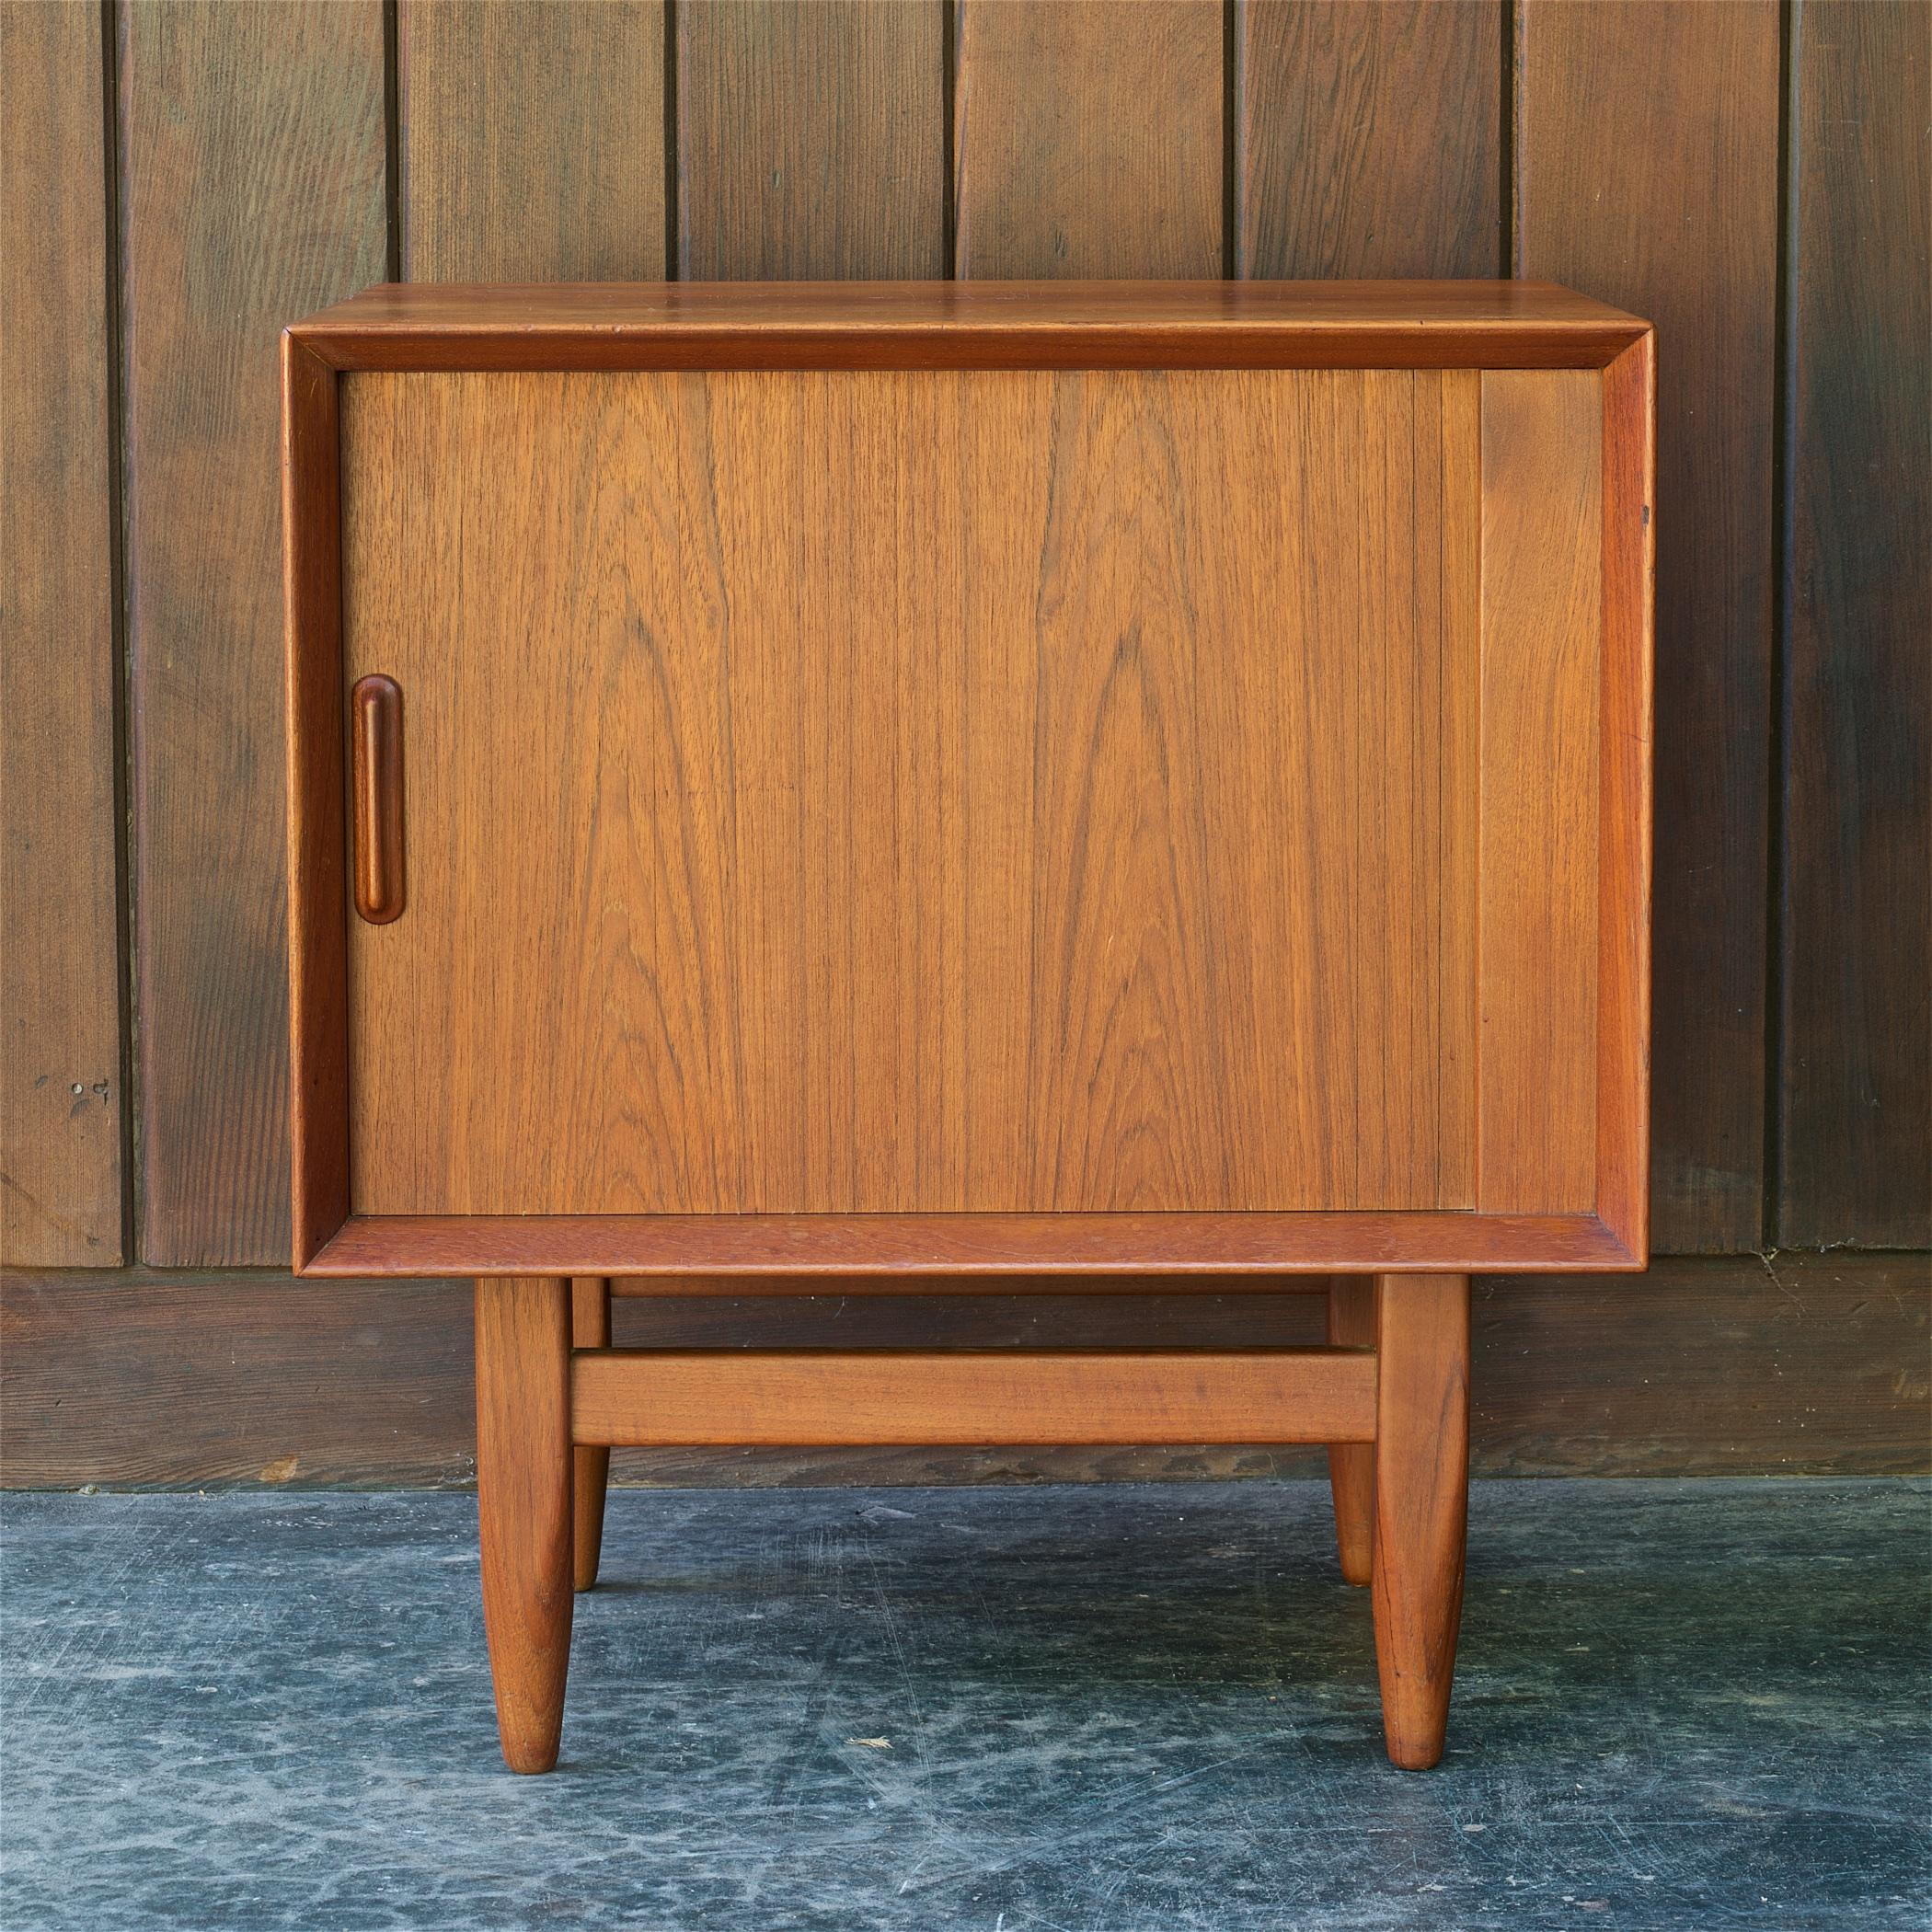 Wonderful short and stout hide-away sliding door bedside cabinet. 

Interior  W 16.25 x D 15 x H 11 in. (H to bottom of drawer.)
